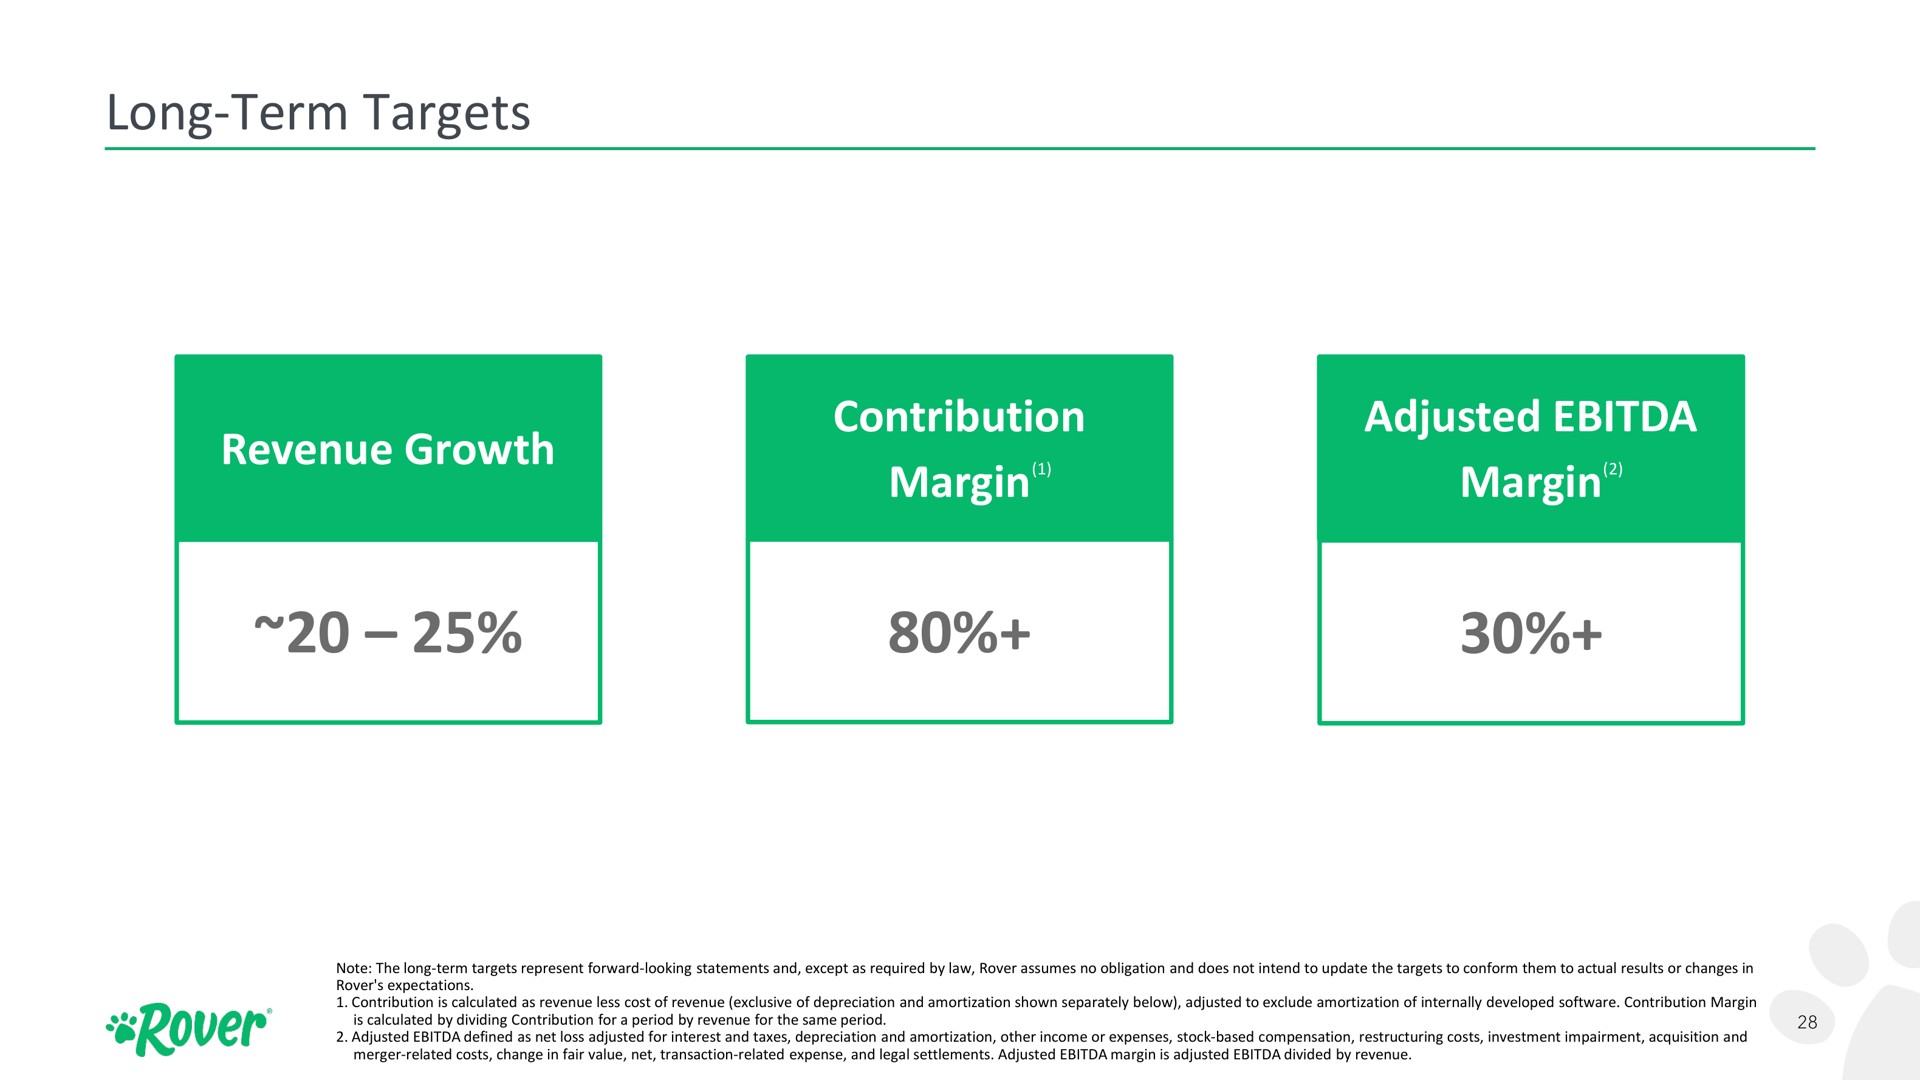 long term targets revenue growth contribution margin adjusted margin | Rover